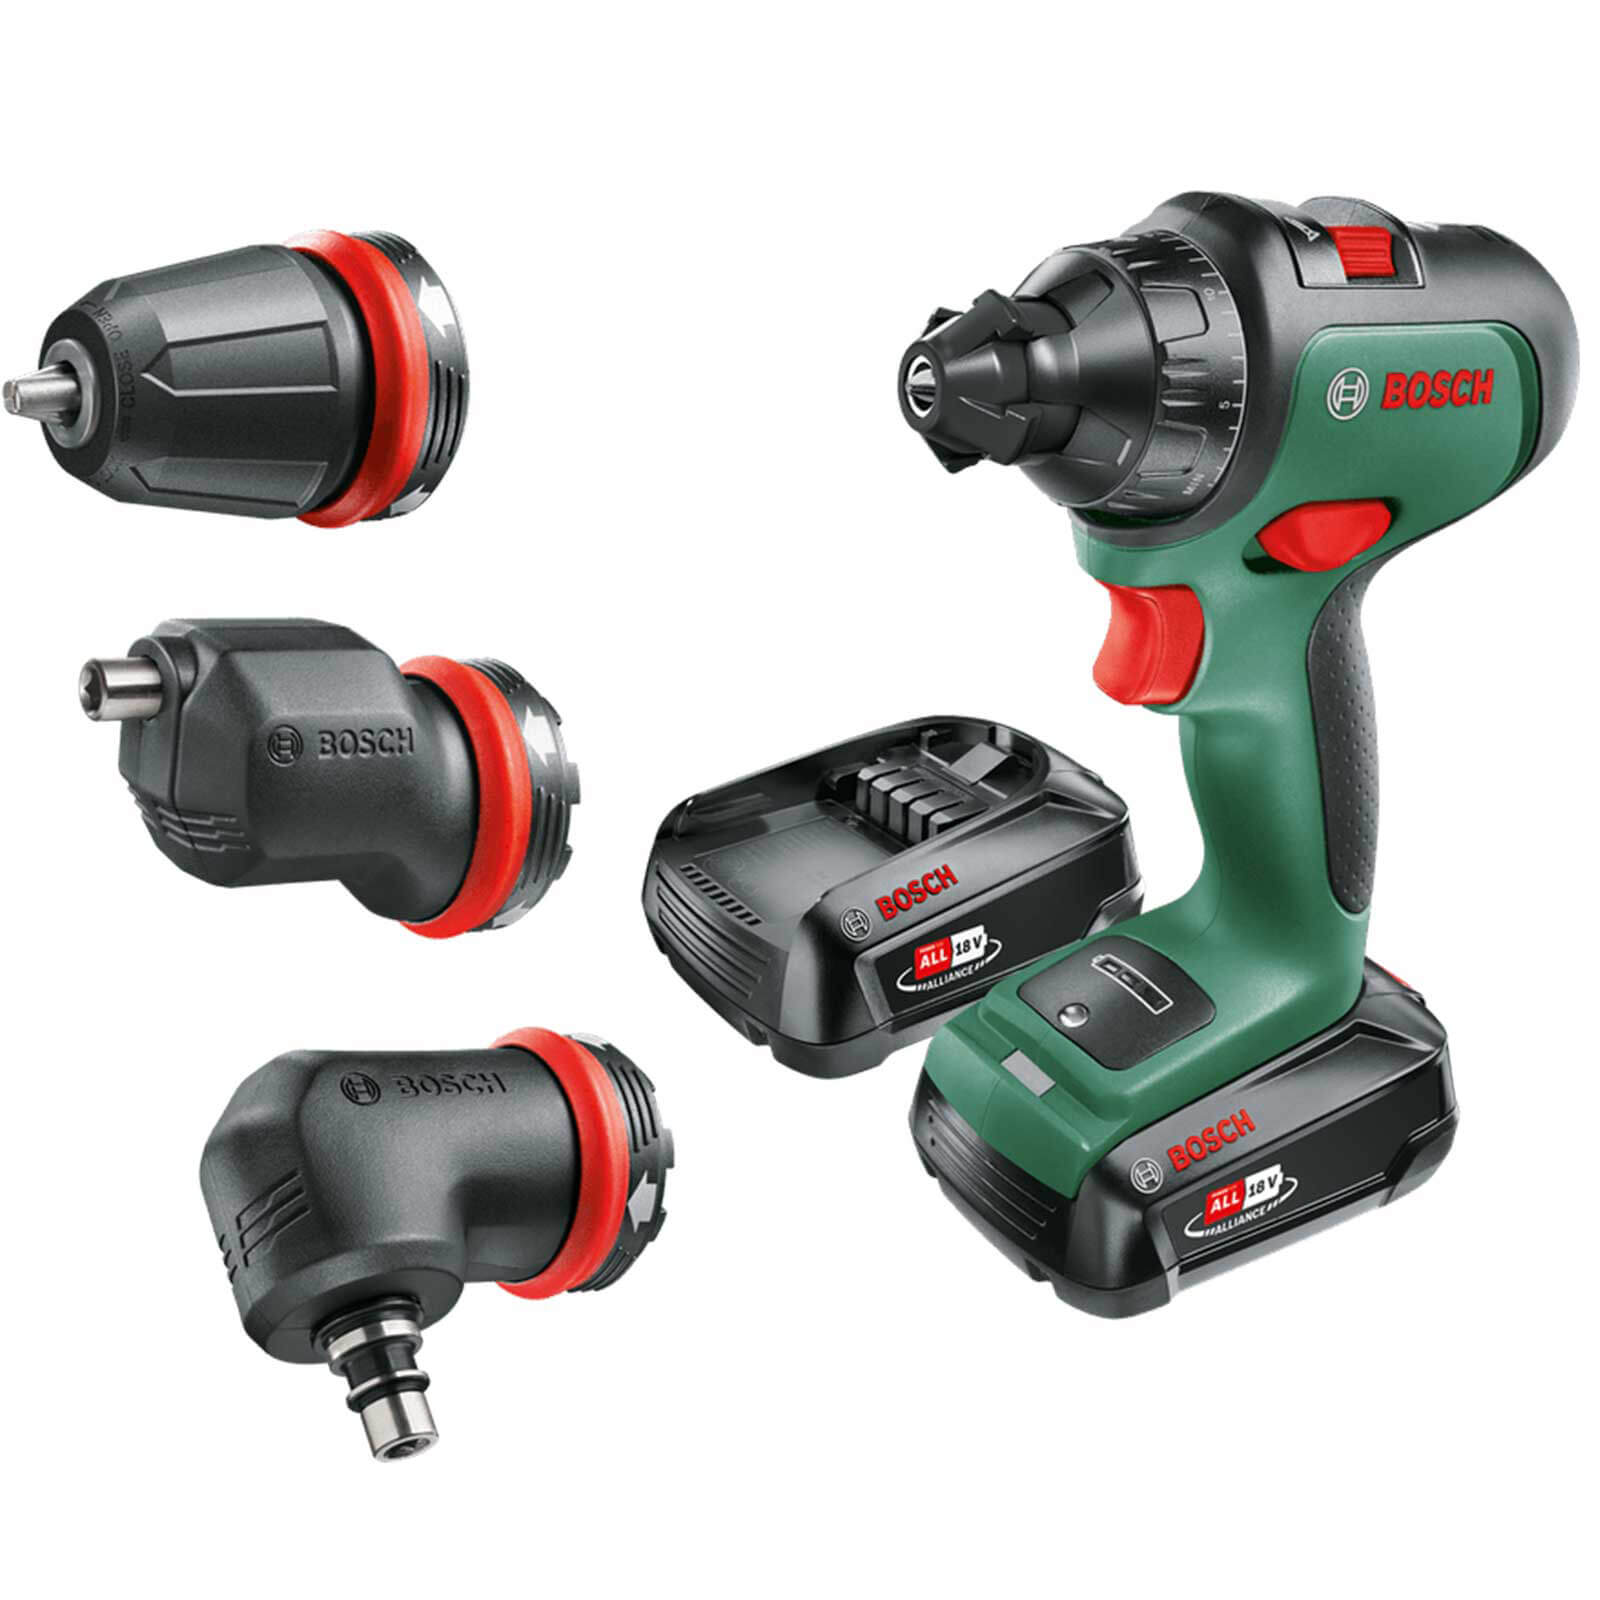 Image of Bosch ADVANCEDDRILL 18v Cordless Drill Driver and Attachments 2 x 2.5ah Li-ion Charger Case & Accessories